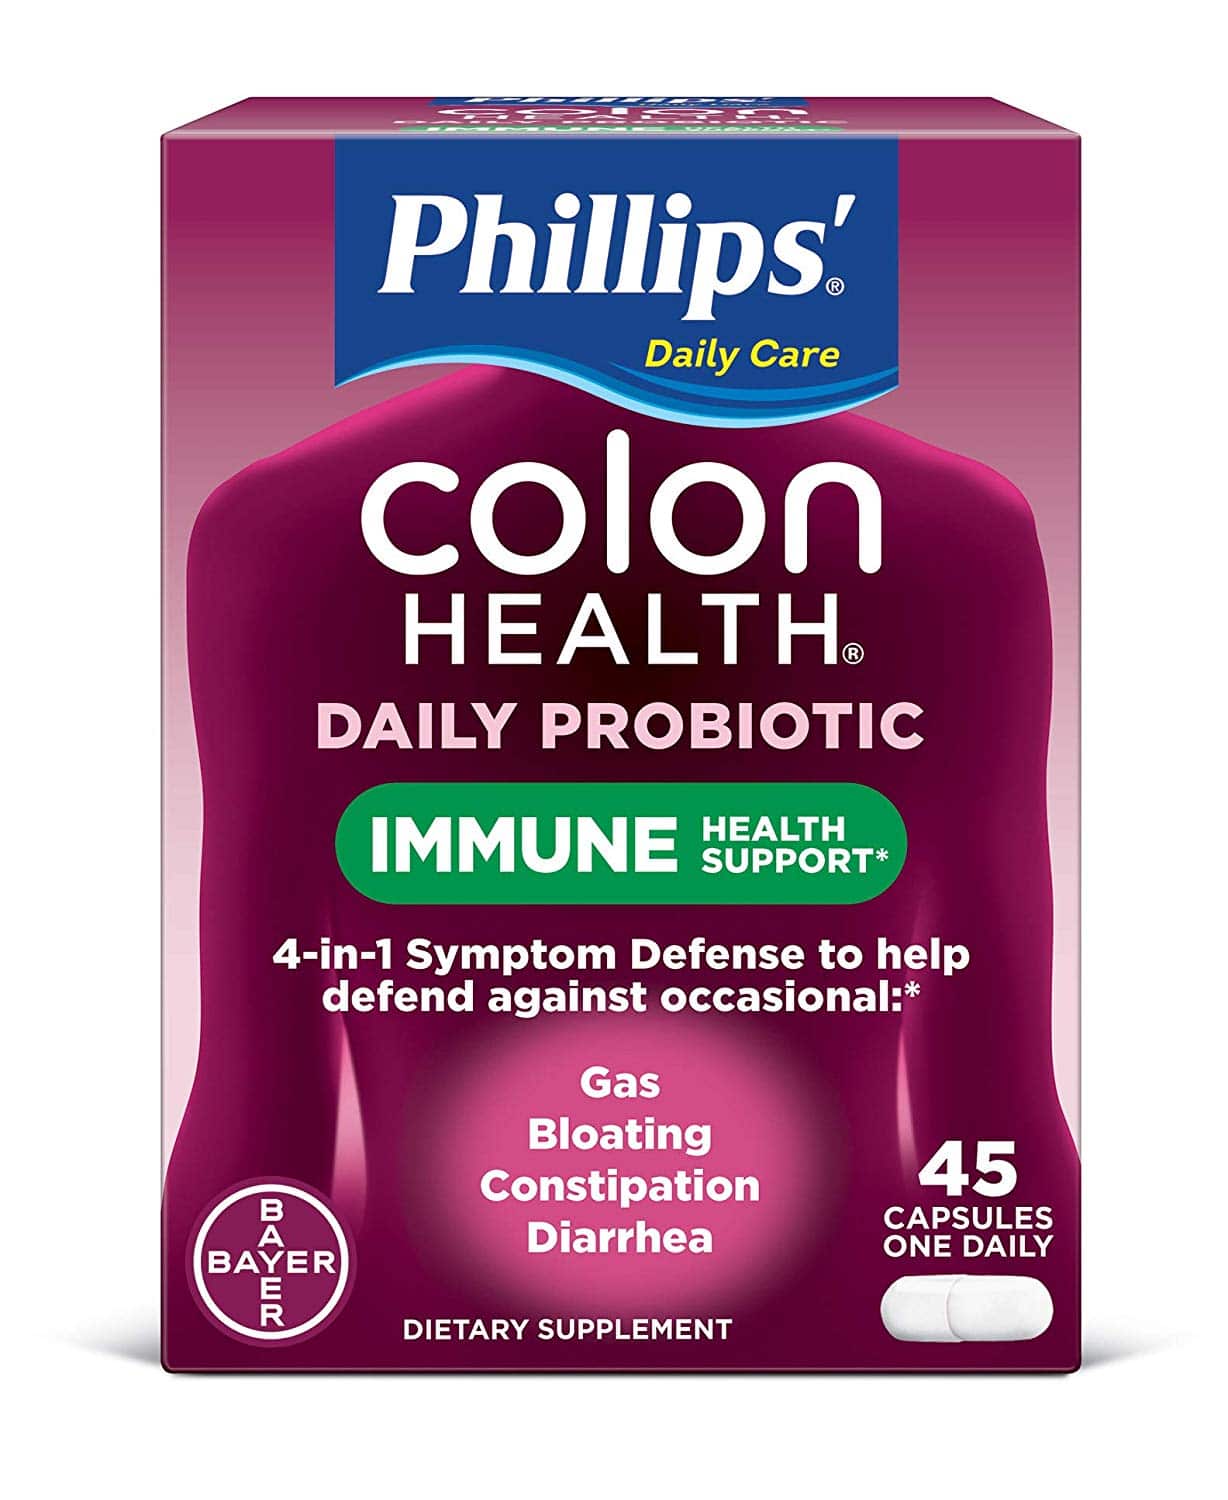 Phillips Colon Health Daily Probiotic 4 In 1 Immune Support 45 Caps ...